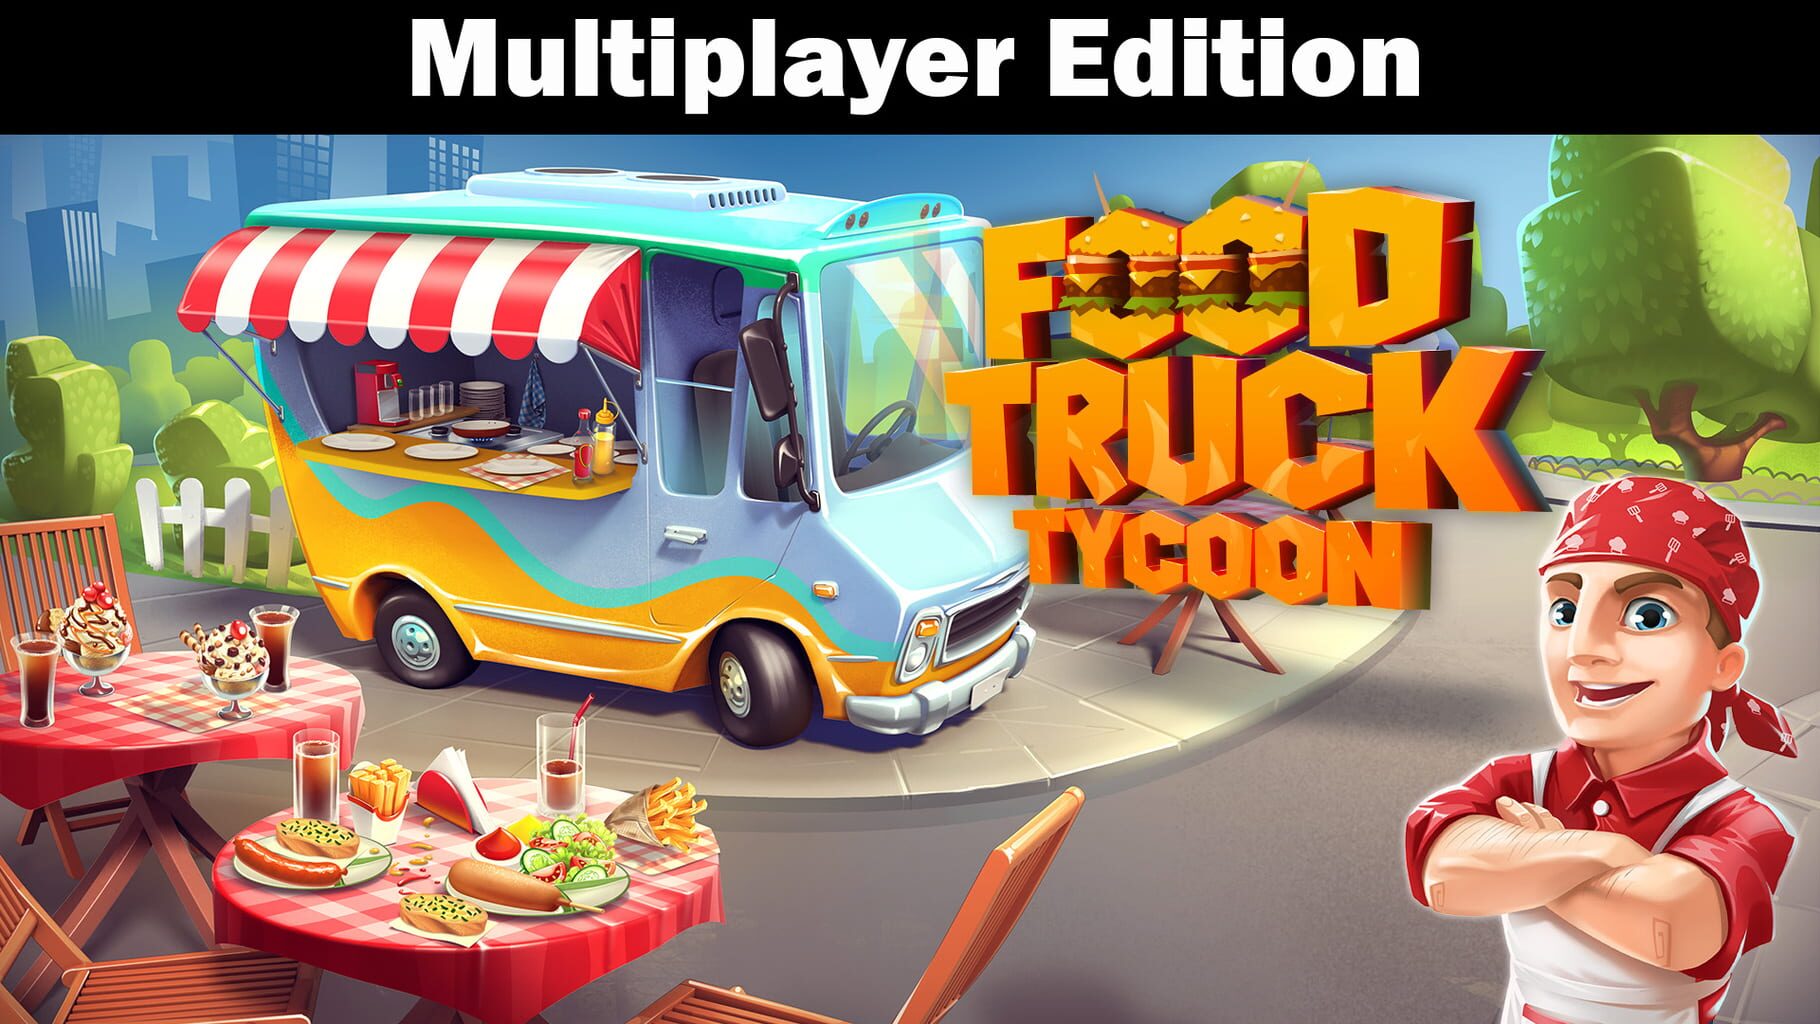 Food Truck Tycoon: Multiplayer Edition artwork